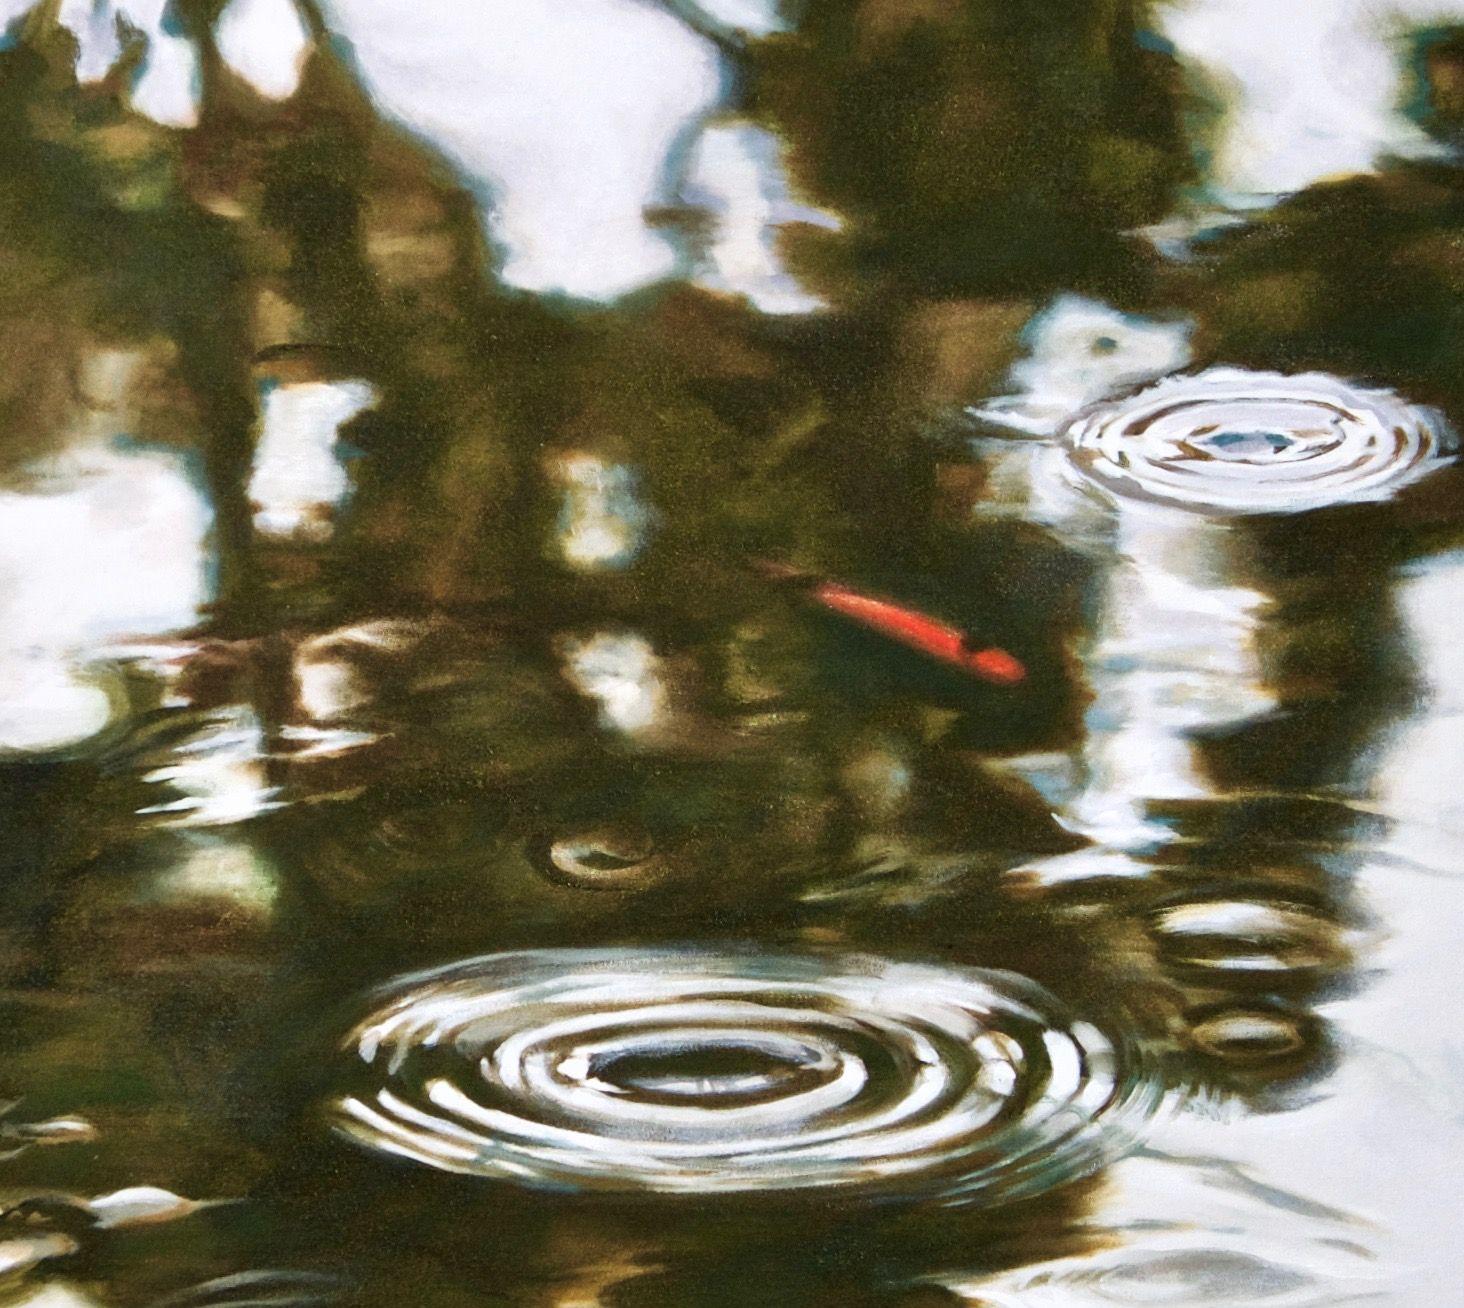 Rain falling on a pond, with a eucalyptus tree reflected in the water's surface. The edges of the reflections morph and move with the disturbance of the raindrops. A small koi fish surfaces. Though rendered realistically, the design and focus are